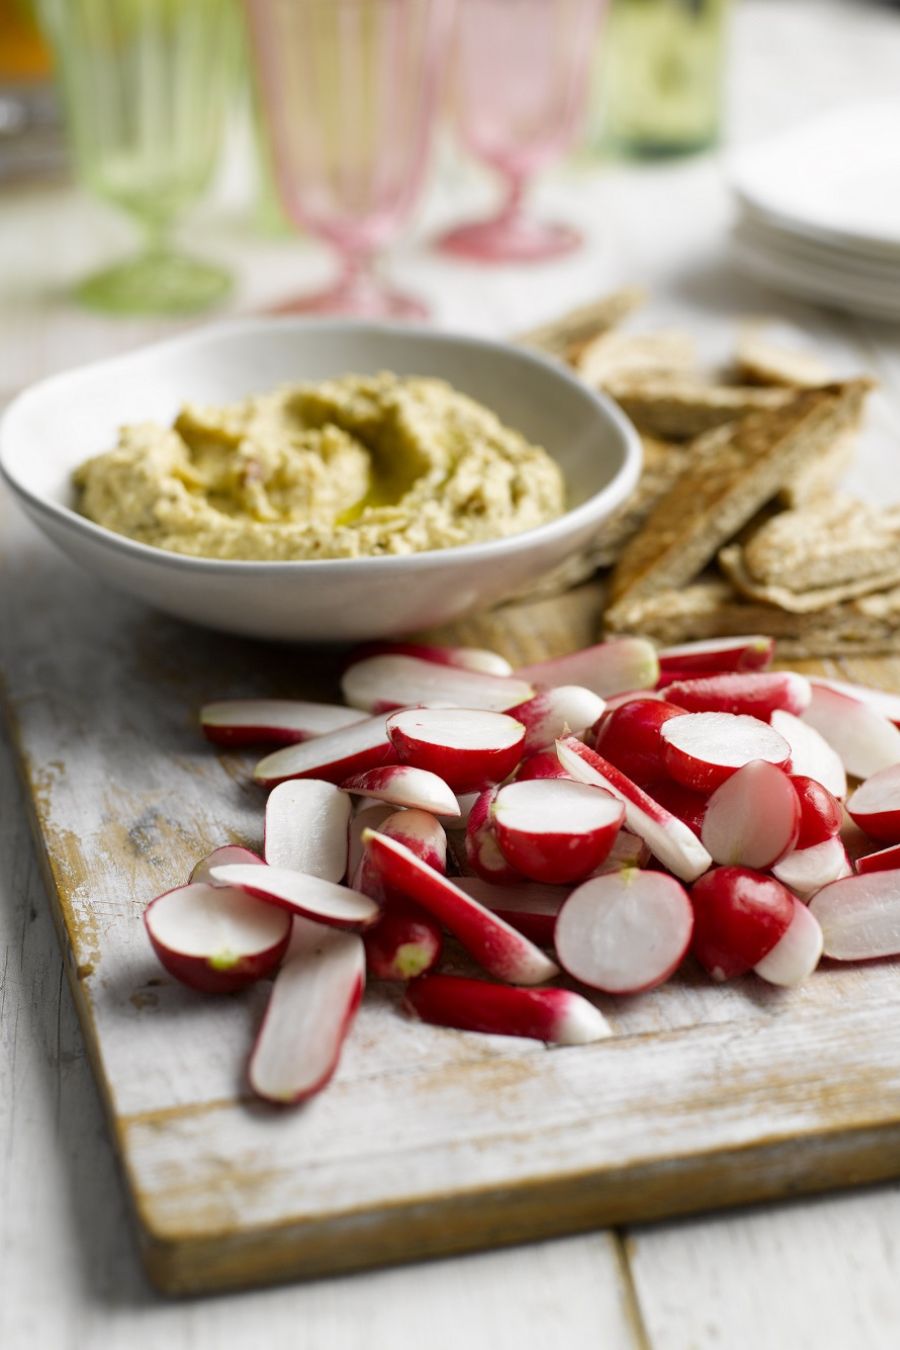 How To Make Toasted Garlic Hummus With Radishes And Pitta Bread